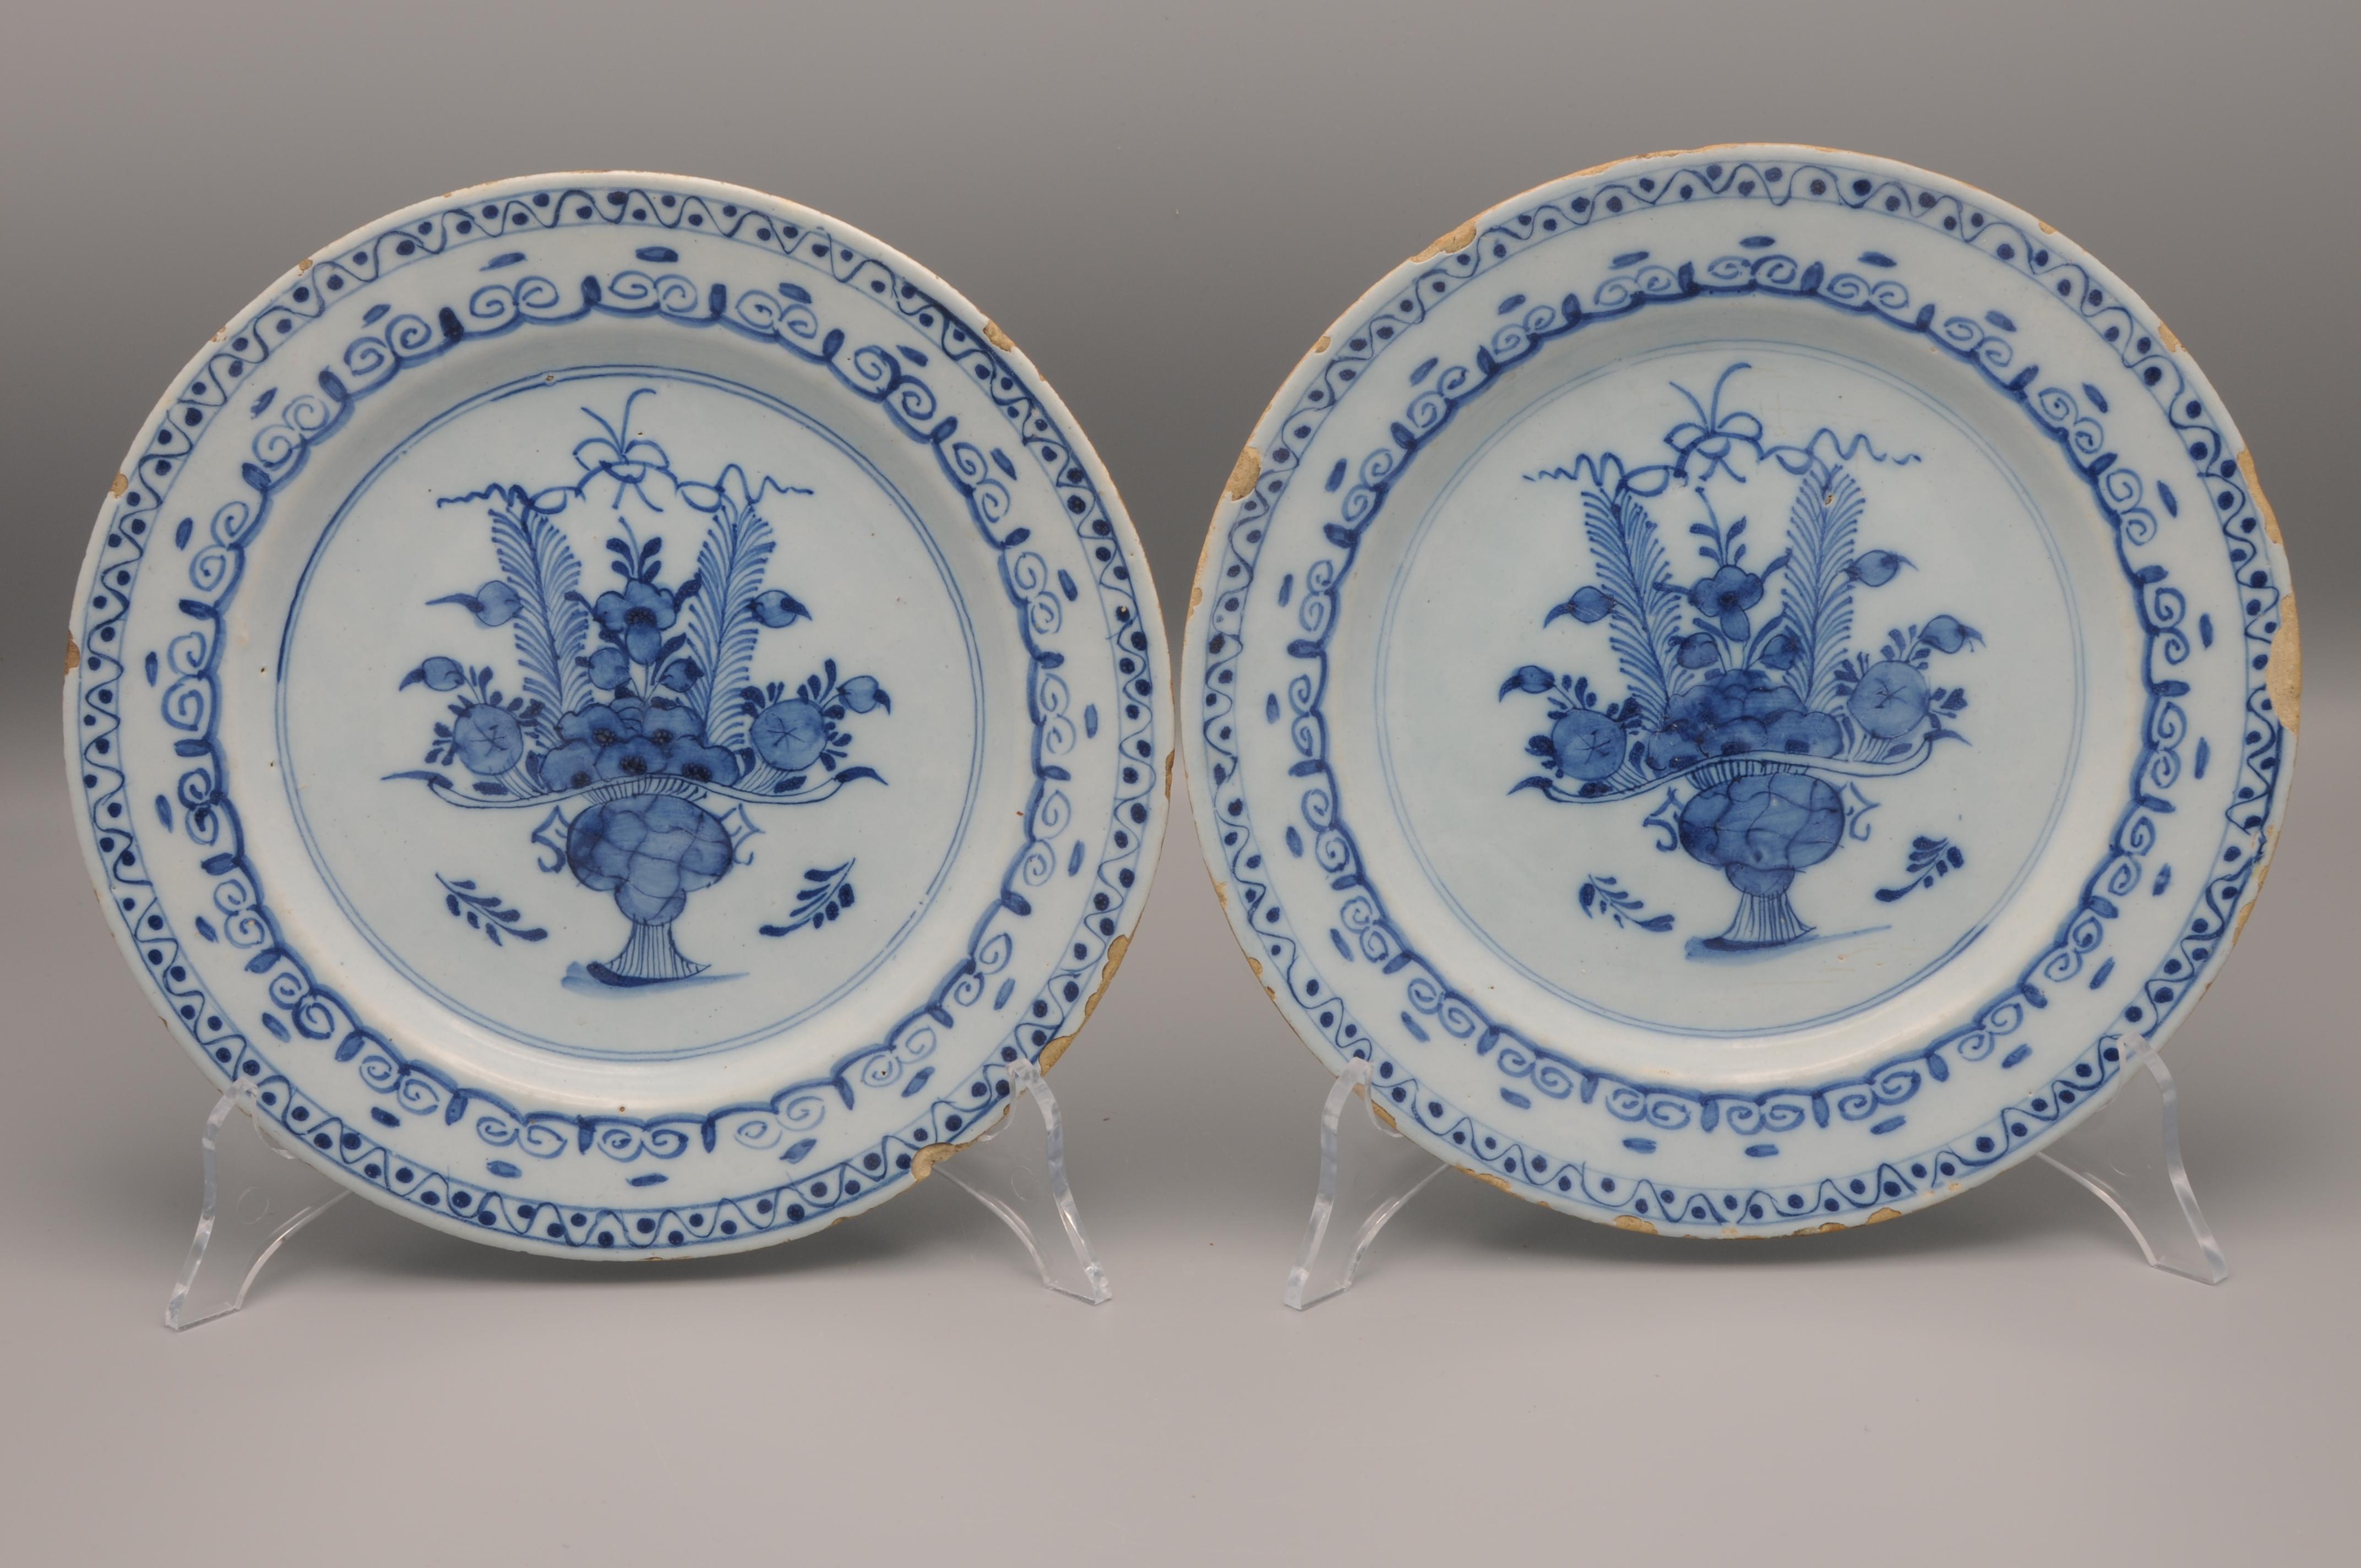 Chinoiserie Delft - Pair of neoclassical chinoiserie plates - Late 18th century  For Sale